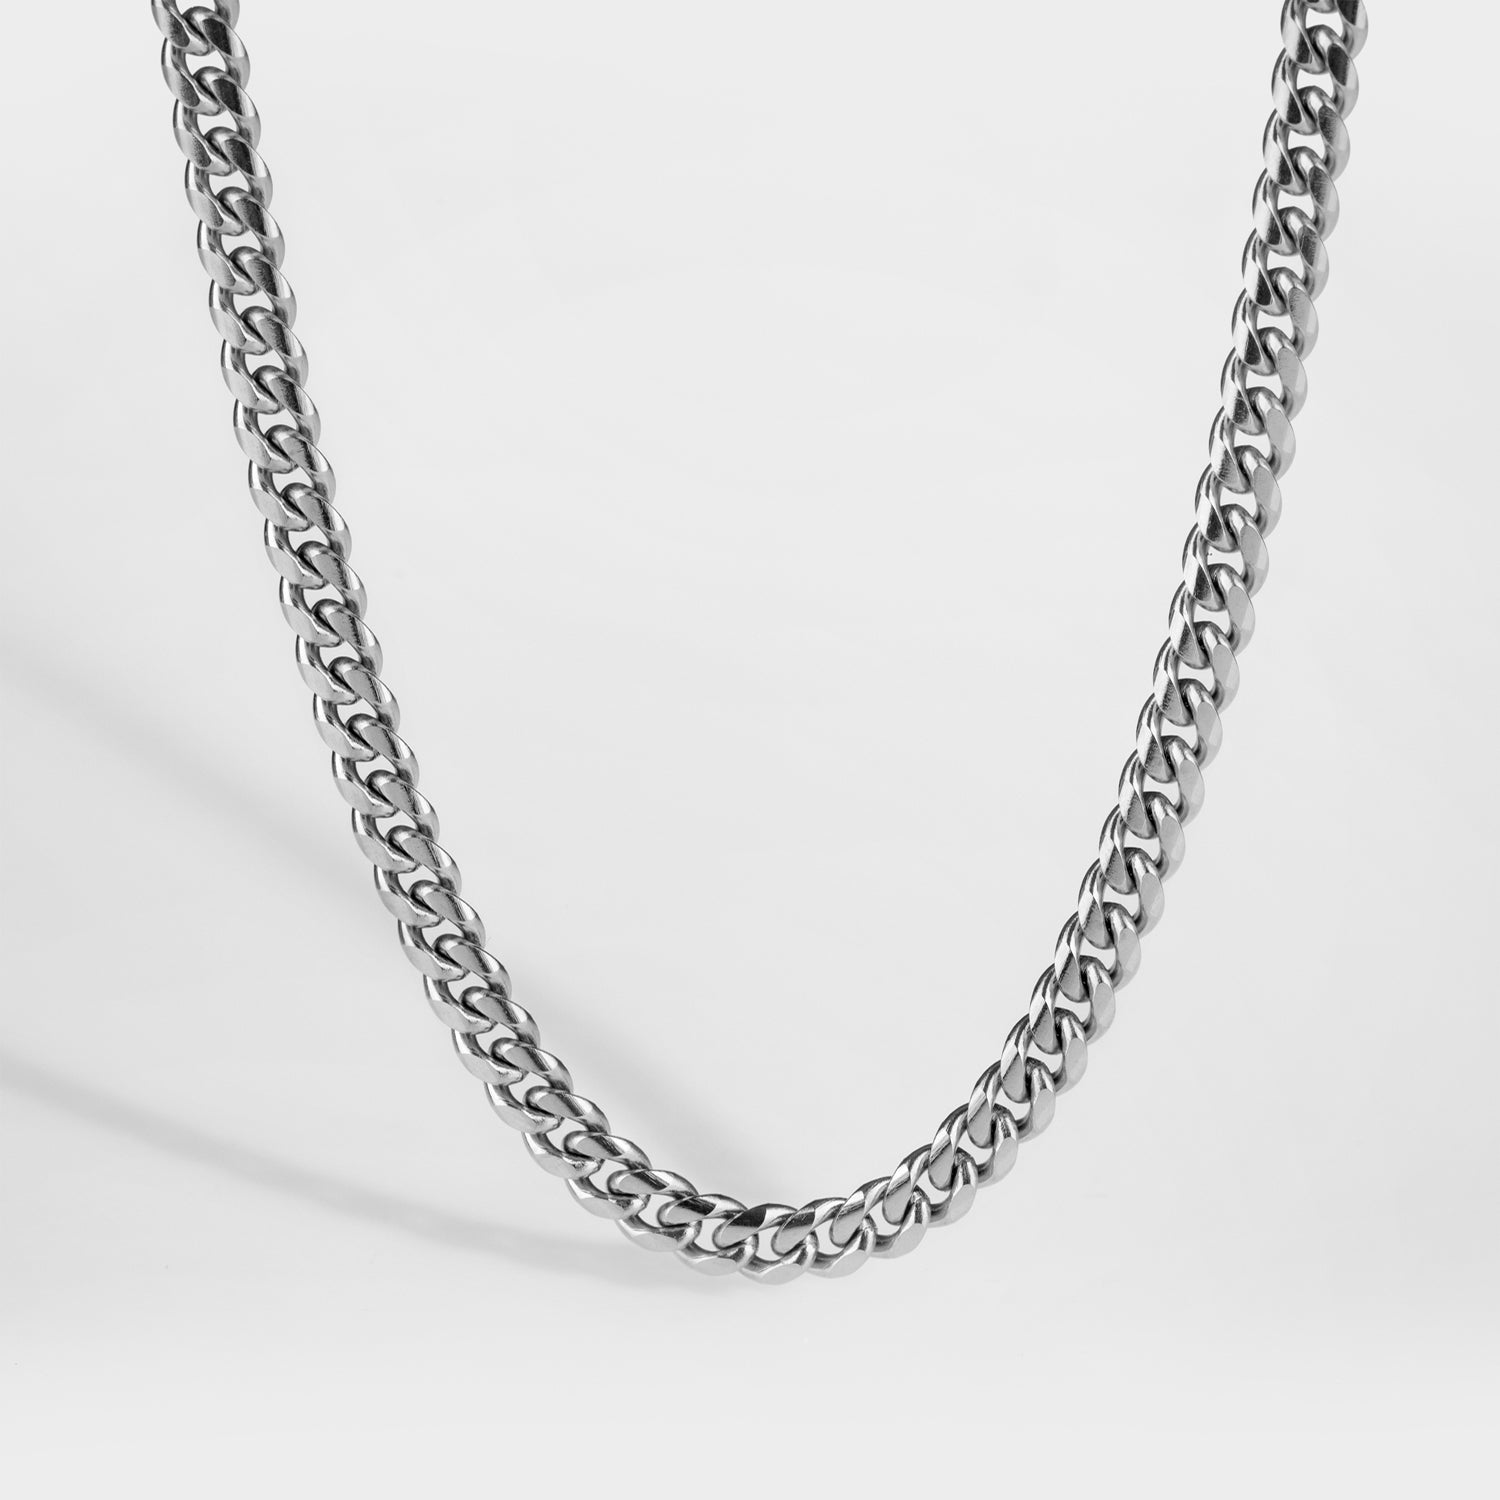 NL Sequence necklace - Silver-toned